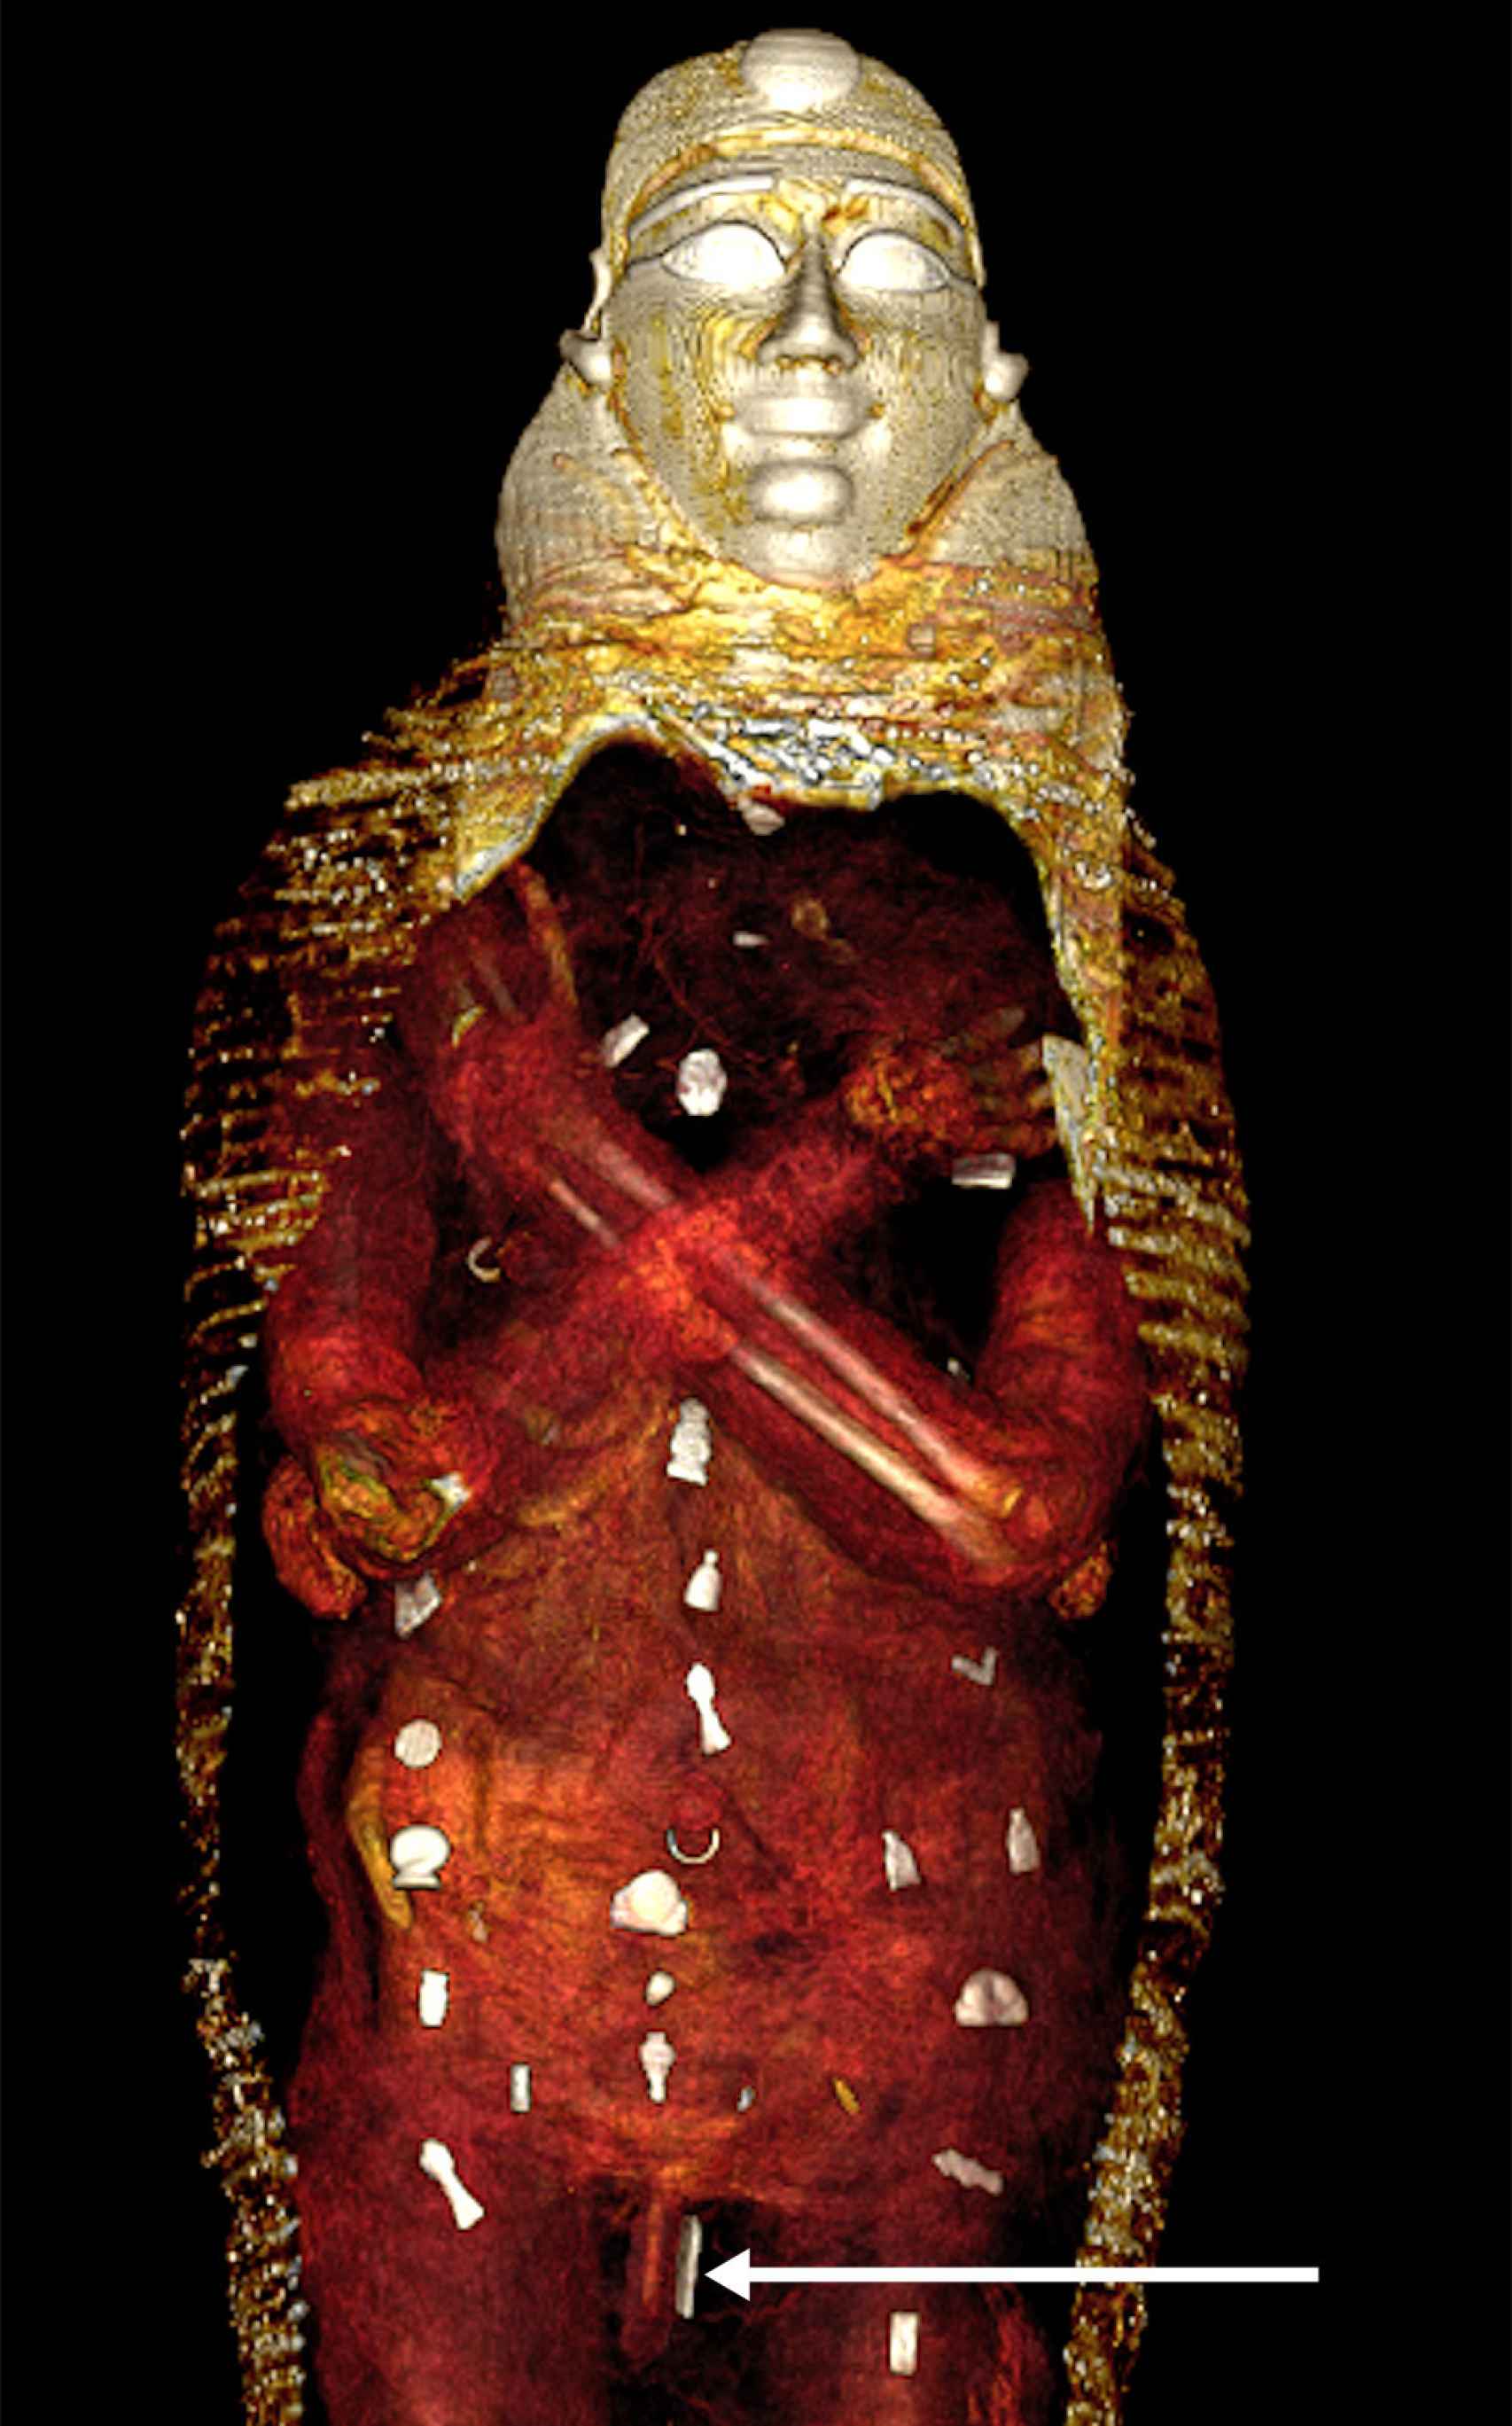 Distribution of objects in the body of the mummy.